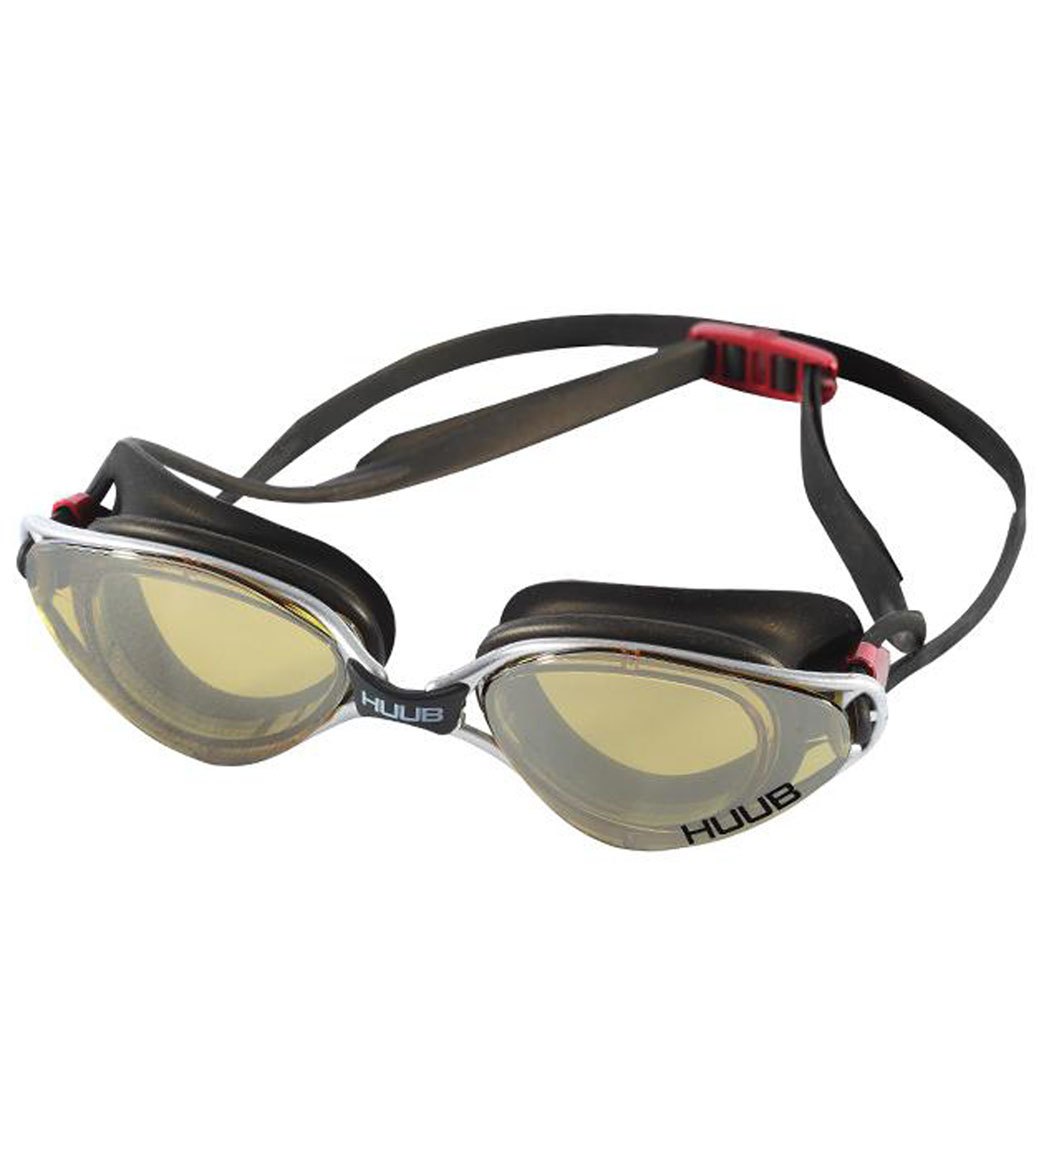 Huub Altair Changeable Lens Goggle at SwimOutlet.com